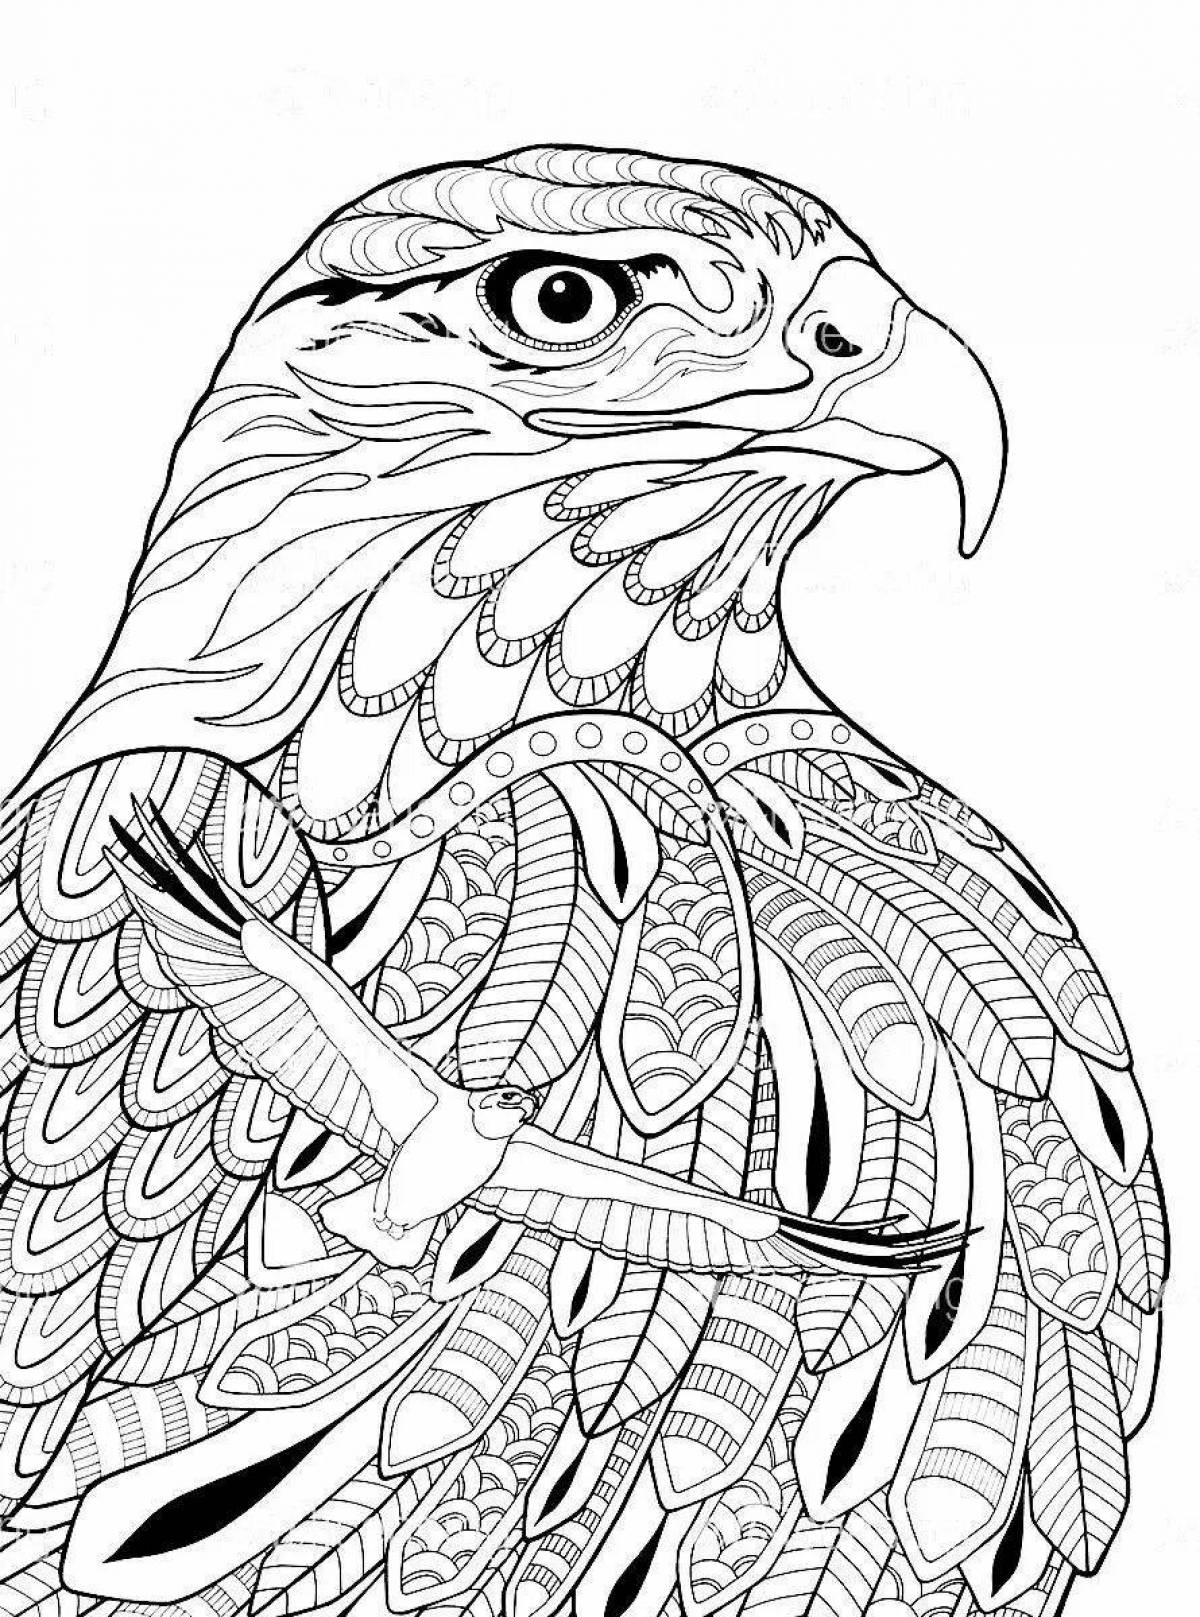 Excellent anti-stress eagle coloring book